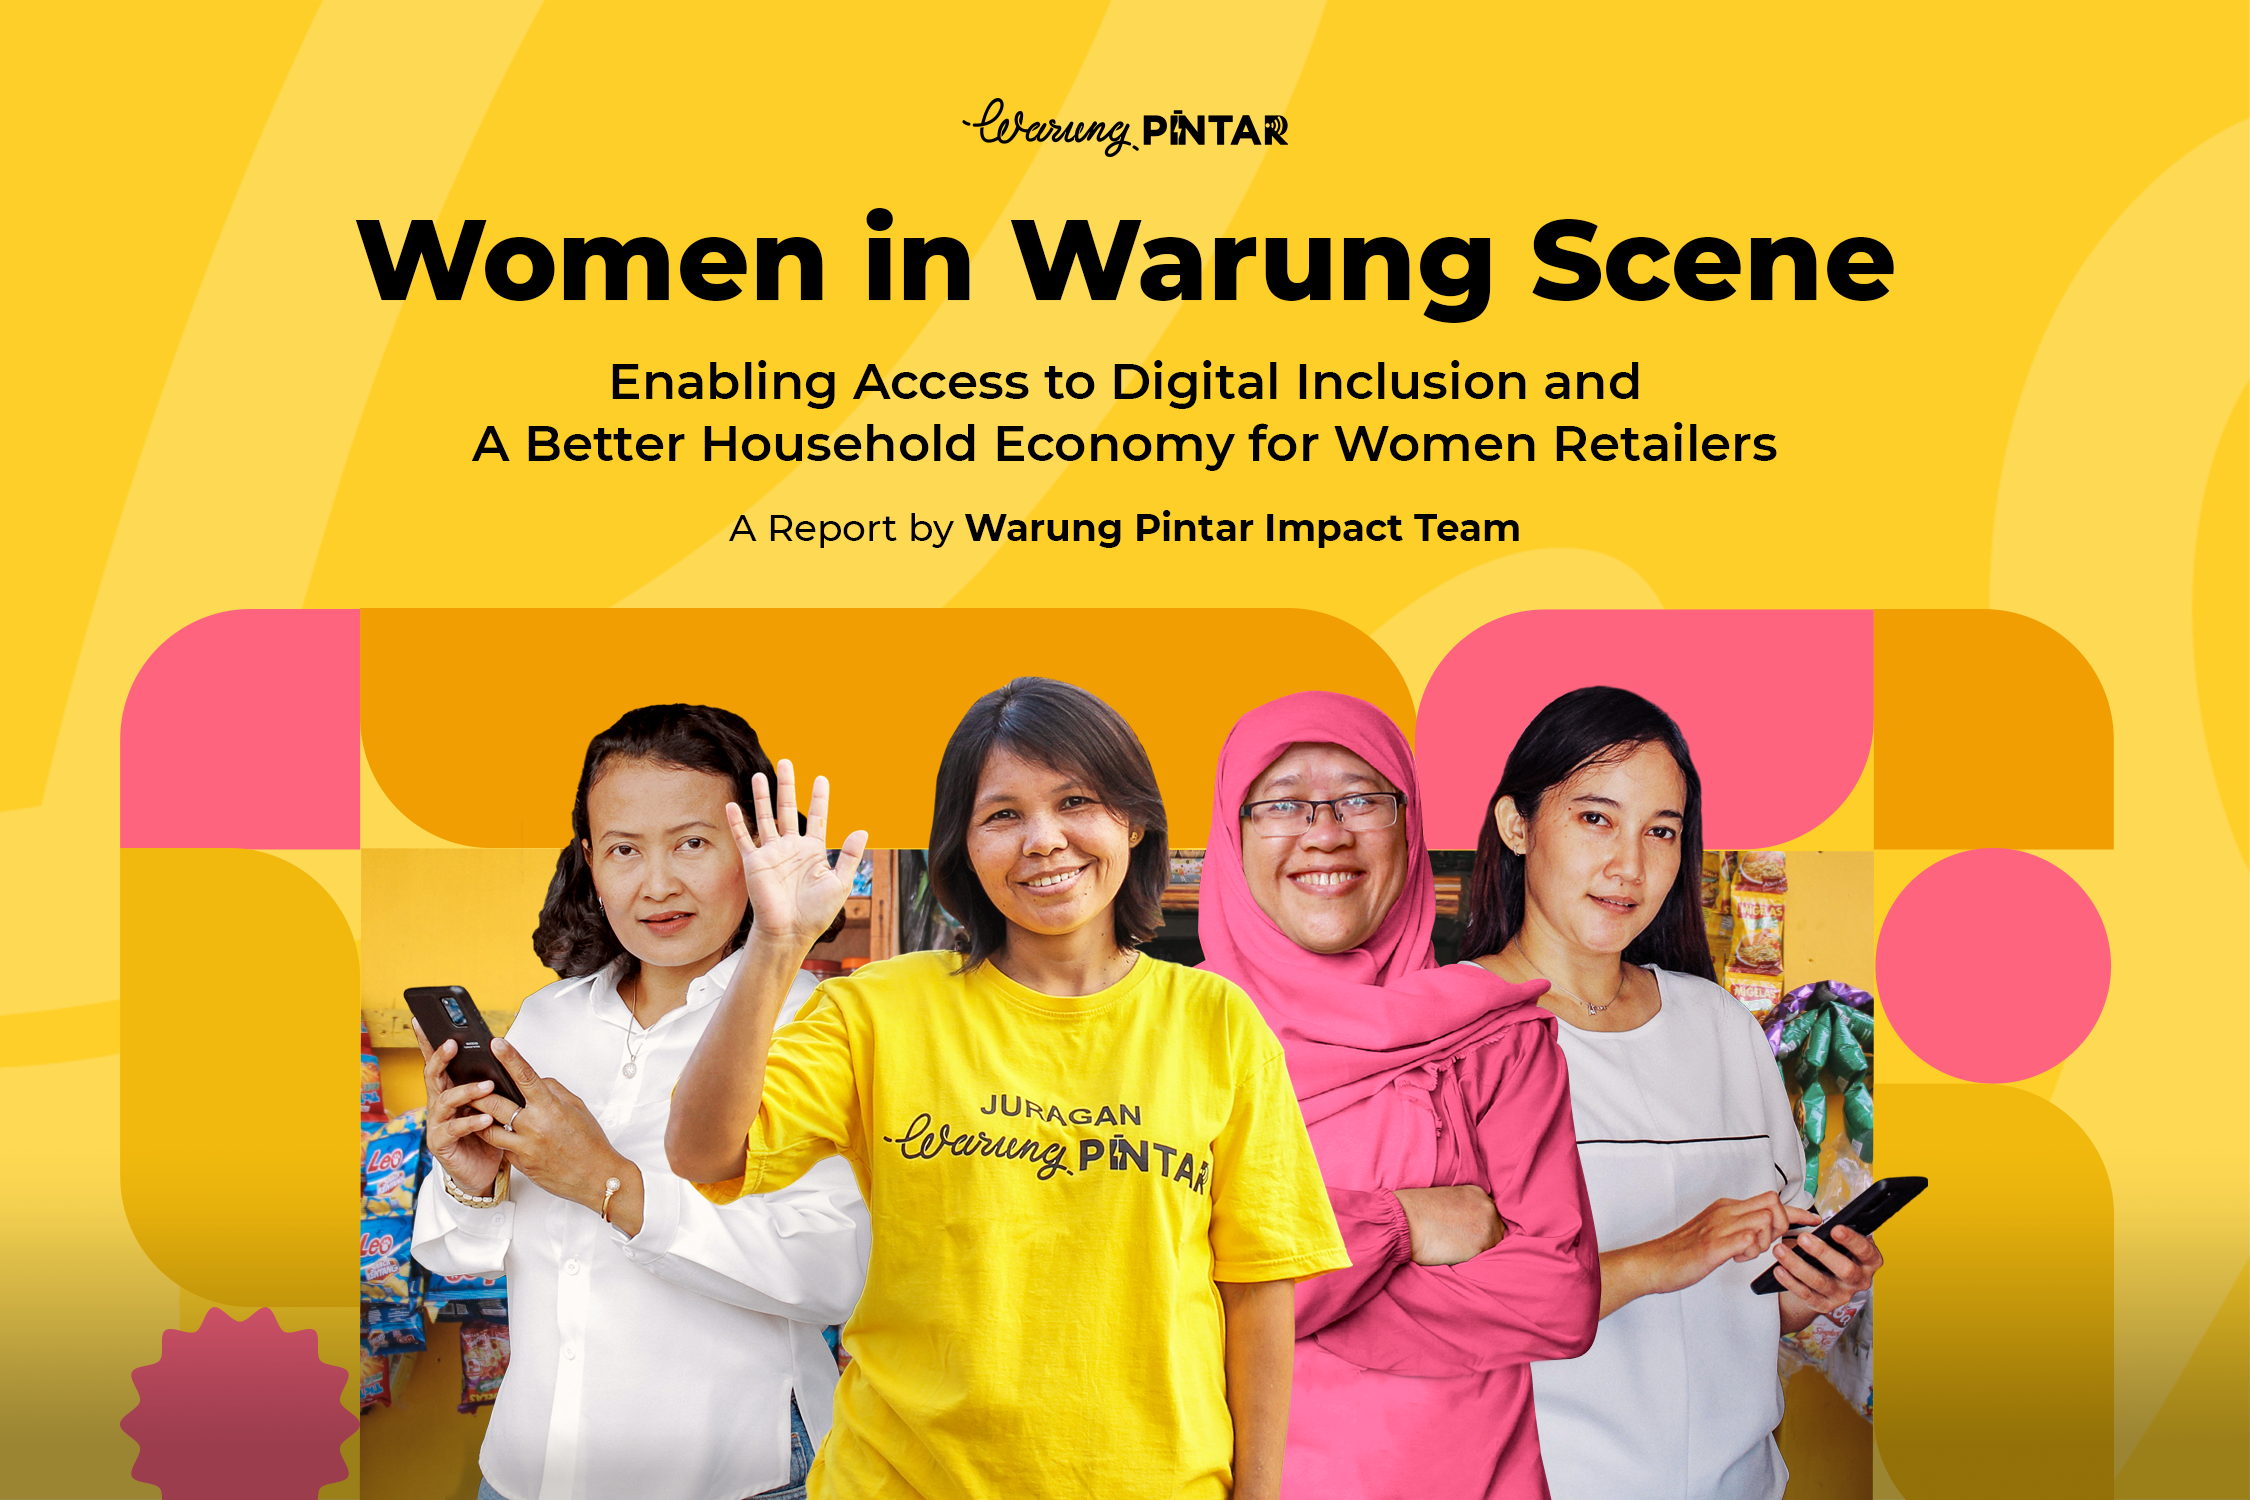 Women in Warung Scene: Enabling Access to Digital Inclusion and A Better Household Economy for Women image